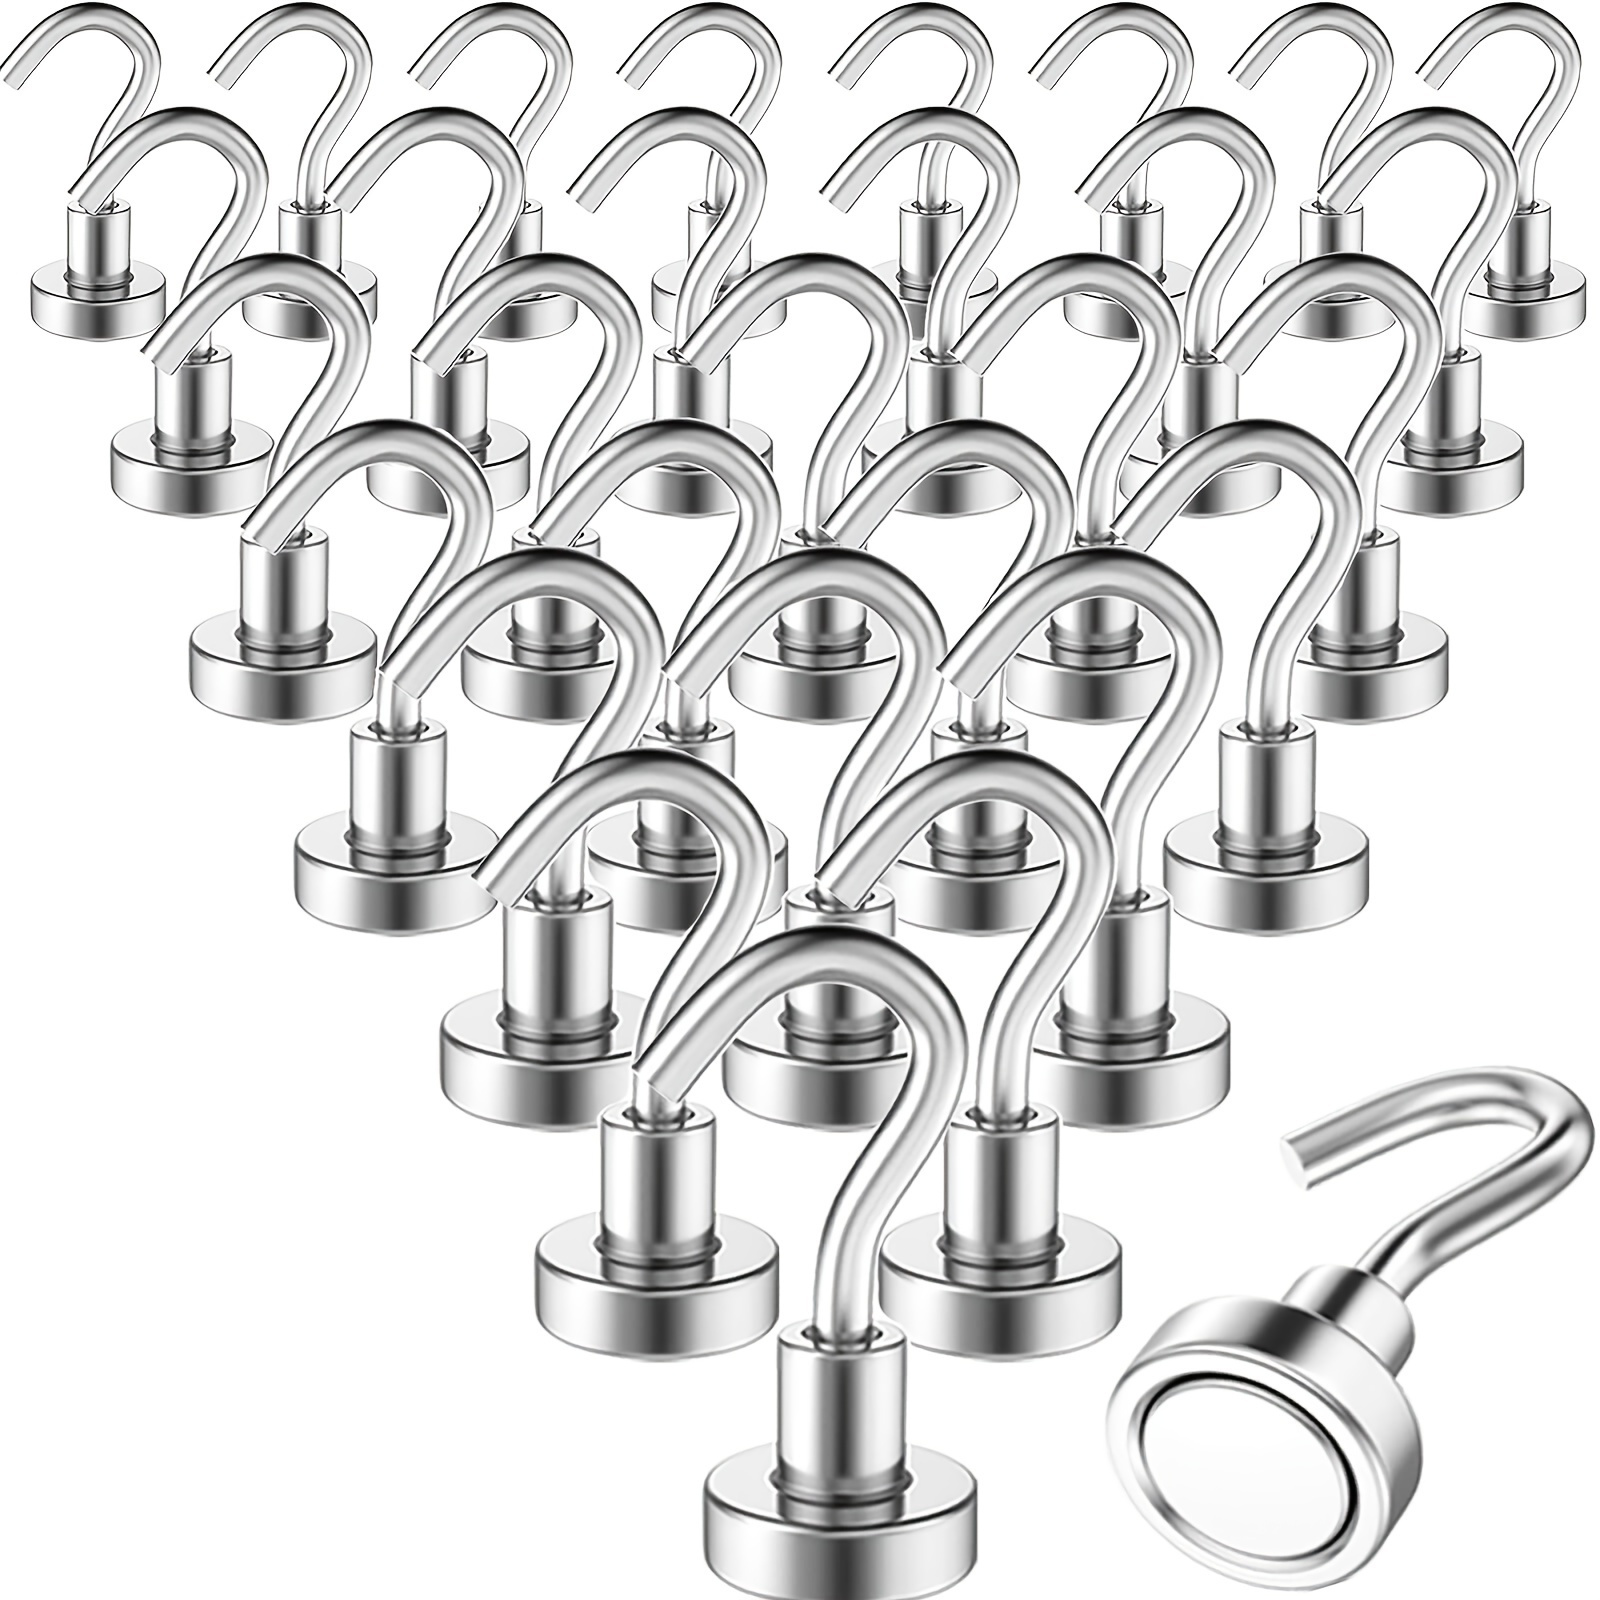 

30pcs/pack Magnetic Hooks Heavy Duty, 25lbs Strong Neodymium Metal Magnets With Magnetic Hooks For Hanging, Magnetic Hooks For Cruise Ship Camping Grill Kitchen Fridge Garage Wall